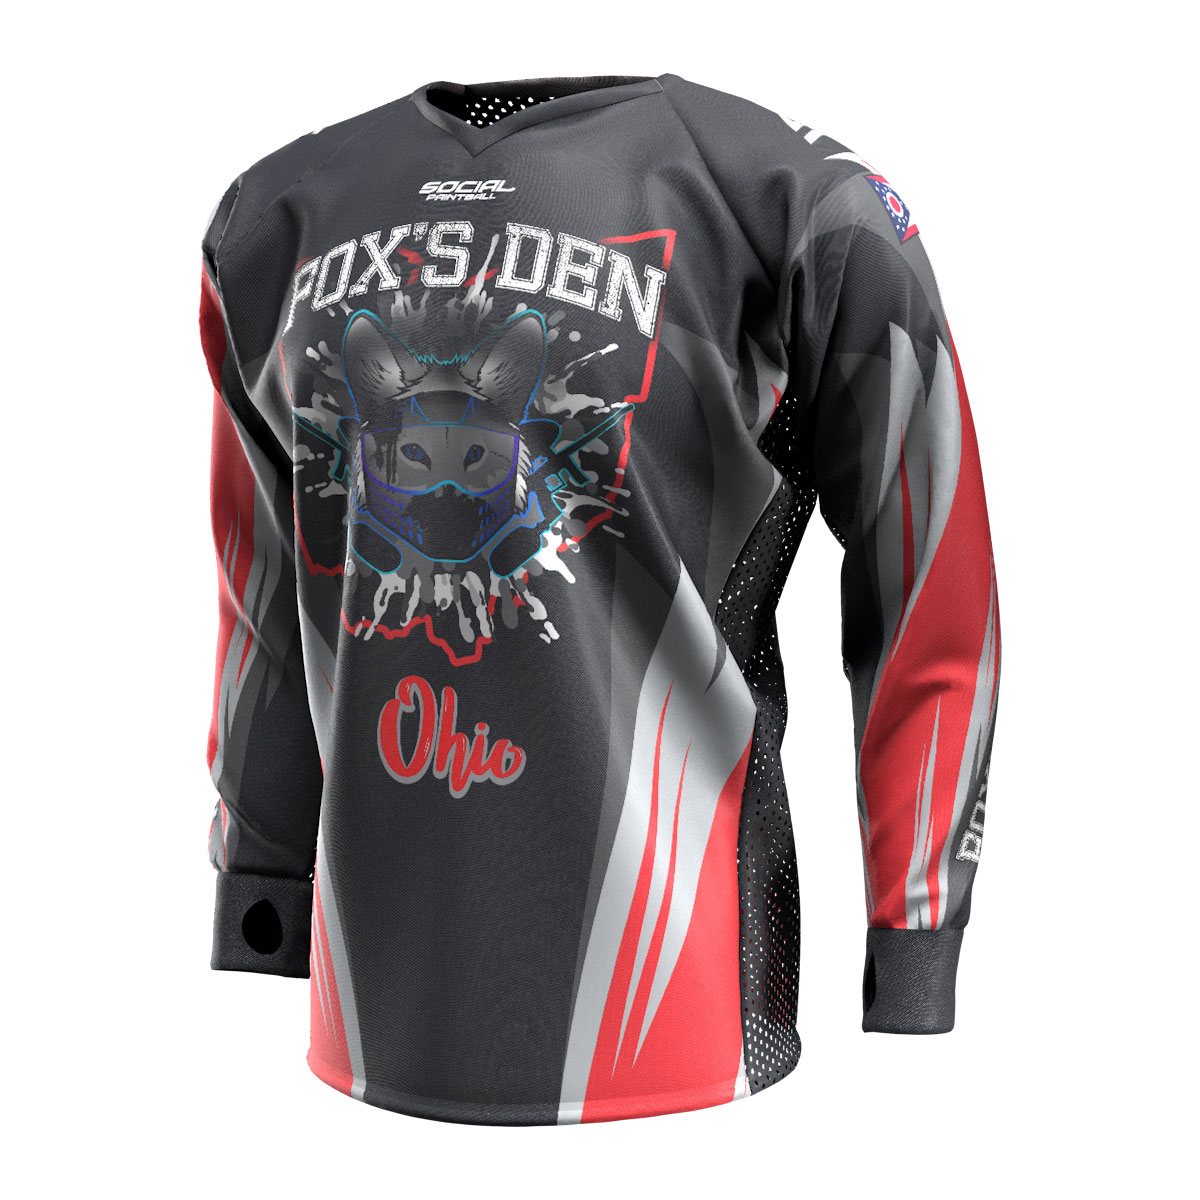 SoS Youth Jersey -   Esports Apparel Design & Production